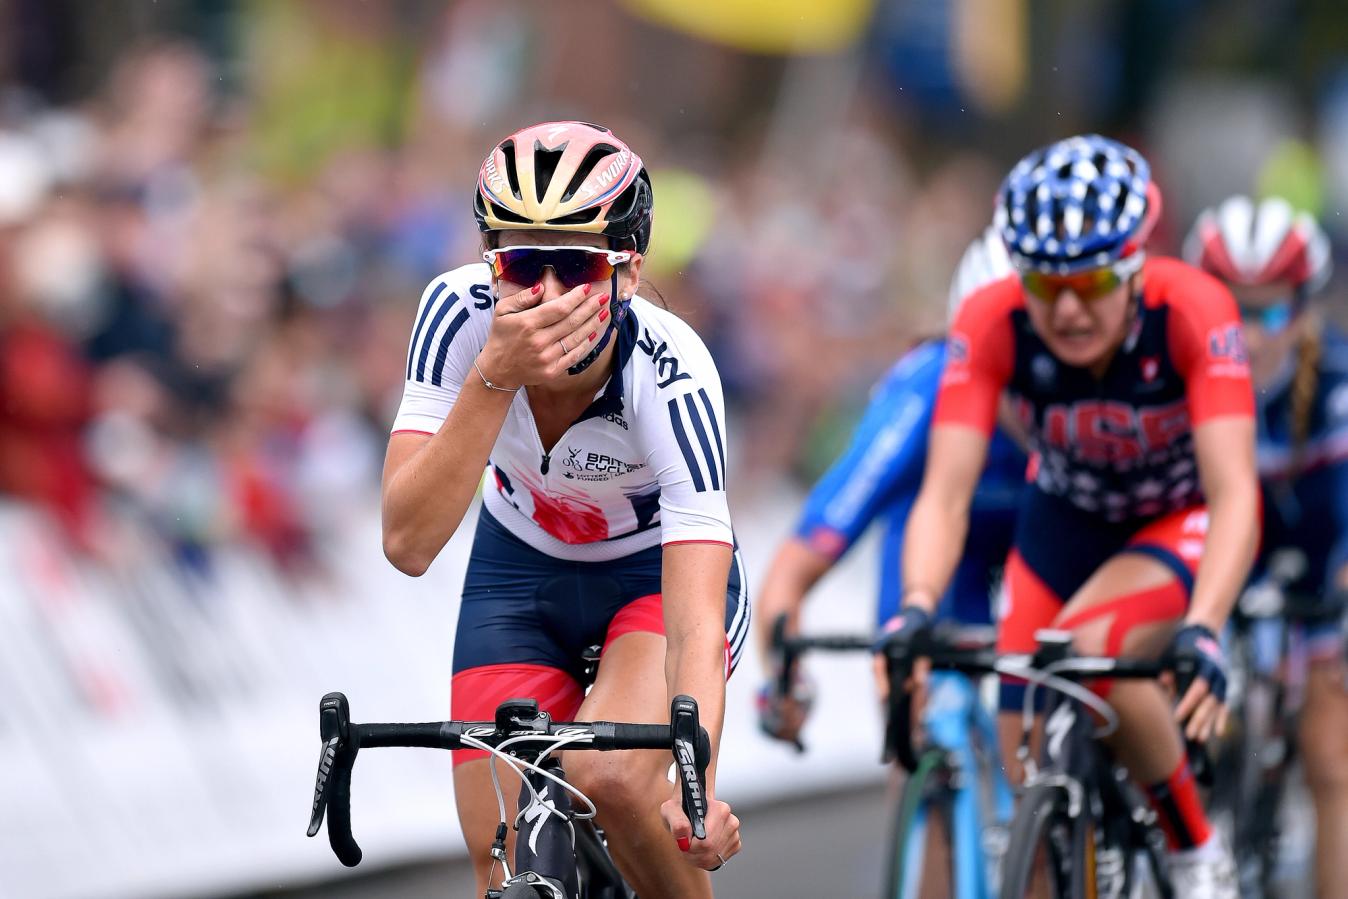 Lizzie Deignan - then Armitstead - covers her mouth with her hand in disbelief after winning the 2015 World Championship road race